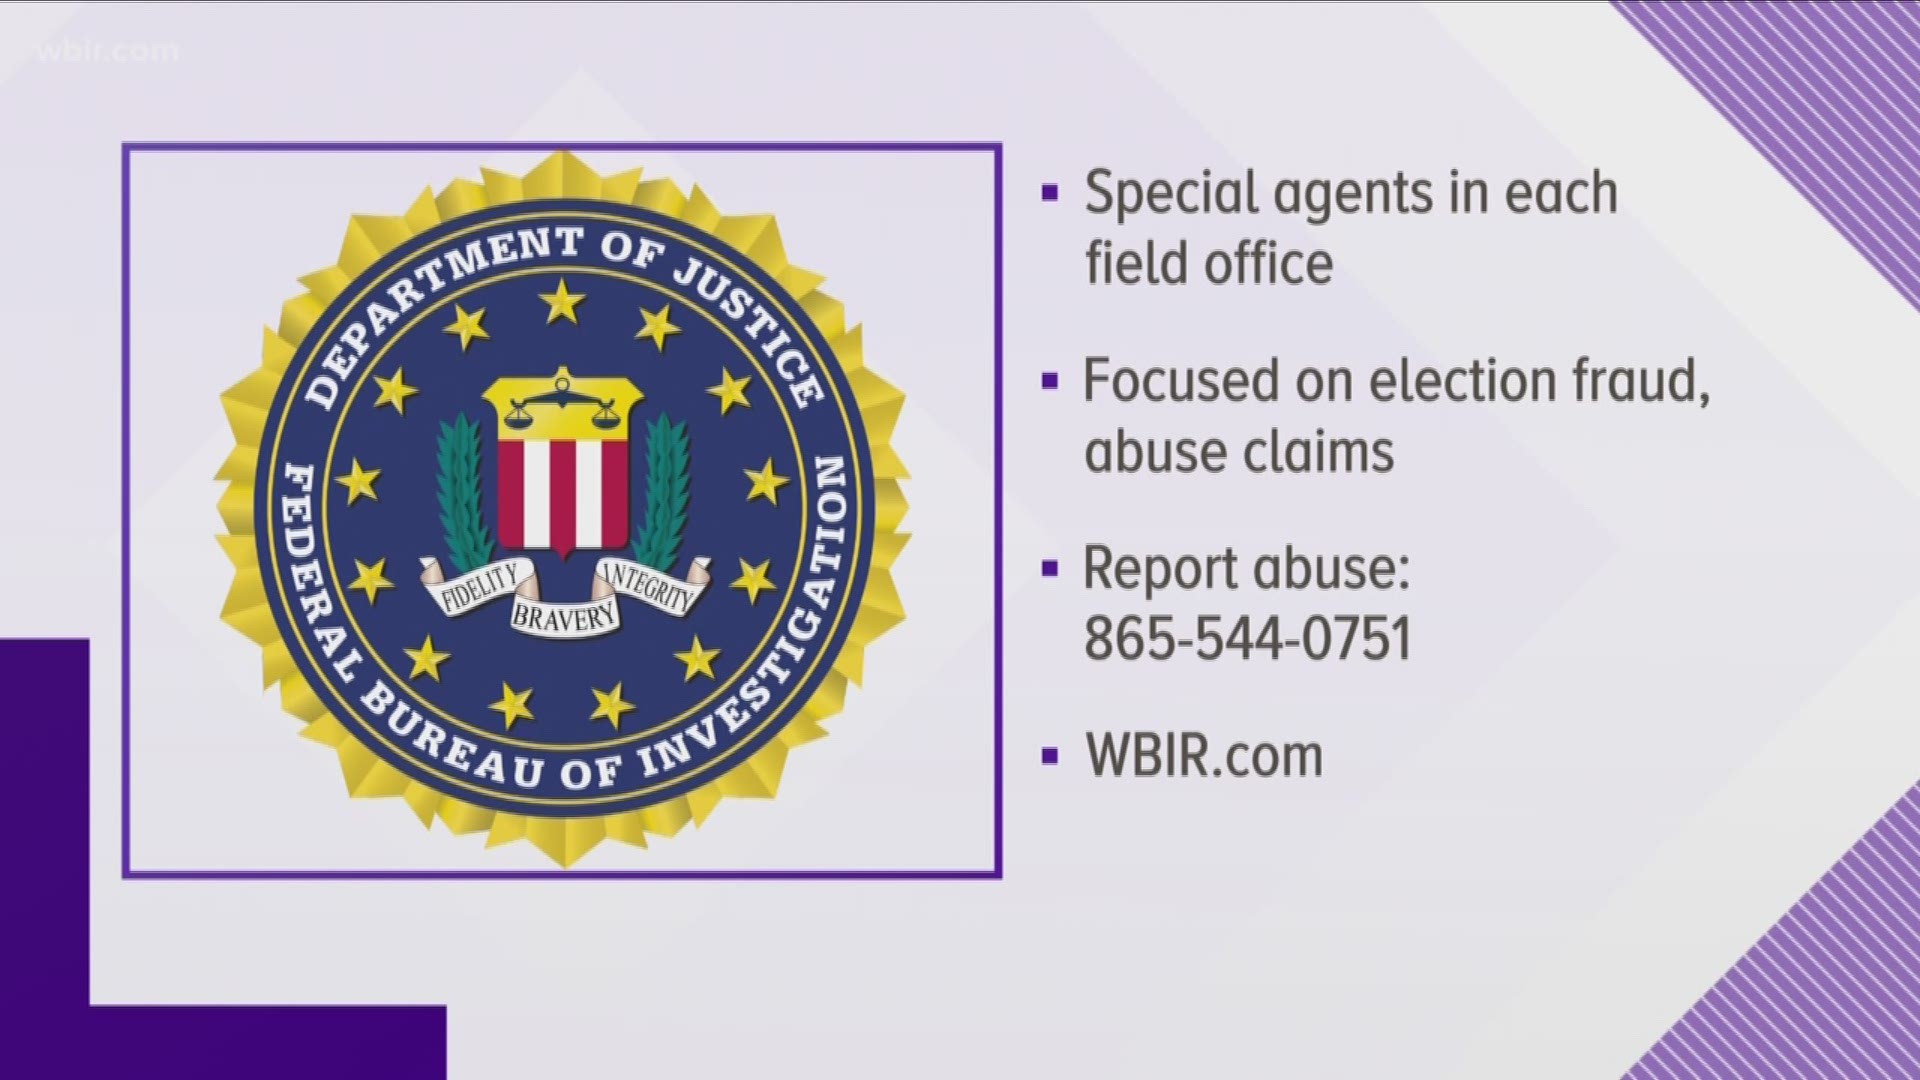 Next Tuesday- the FBI will have special agents in each field office ready to track down any questions about election fraud or abuse.